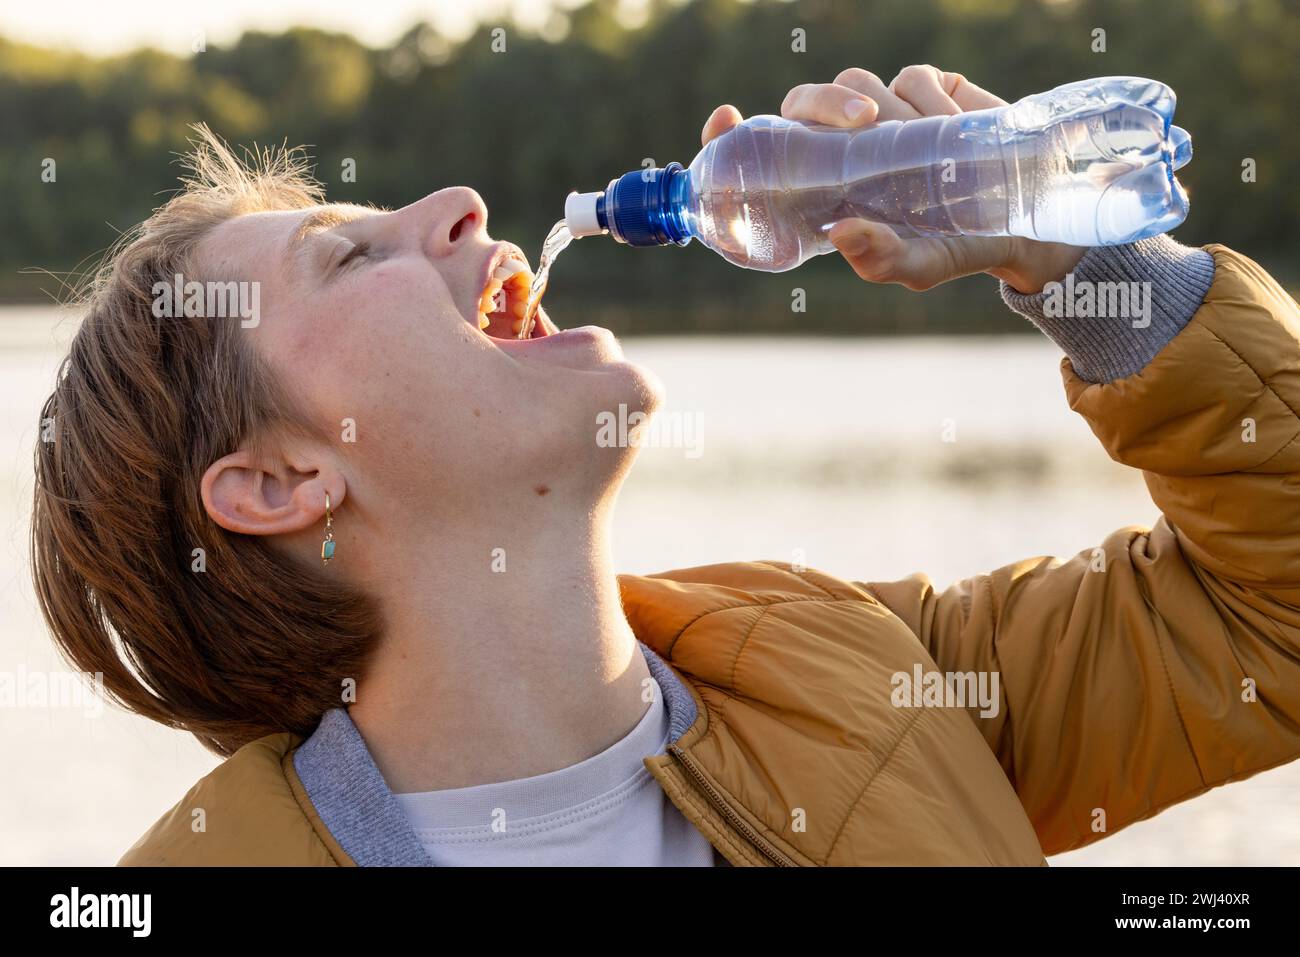 Refreshment by the Lake: Quenching Thirst in Nature Stock Photo